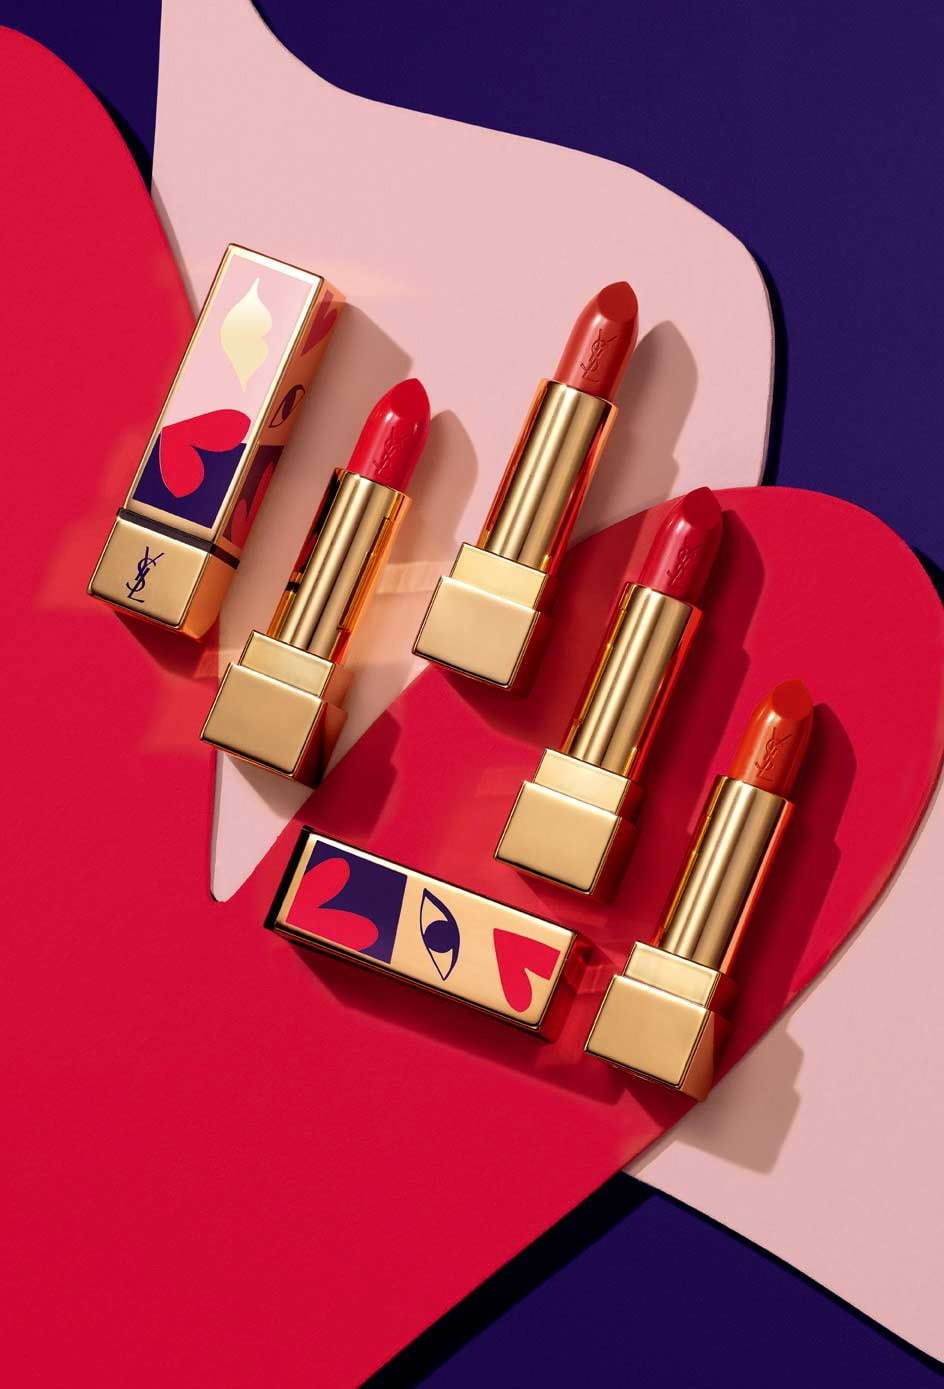 YSL I LOVE YOU SO POP SUMMER 2020 COLLECTION INSPIRED BY POP ART 1 - YSL I LOVE YOU SO POP SUMMER 2020 COLLECTION INSPIRED BY POP ART